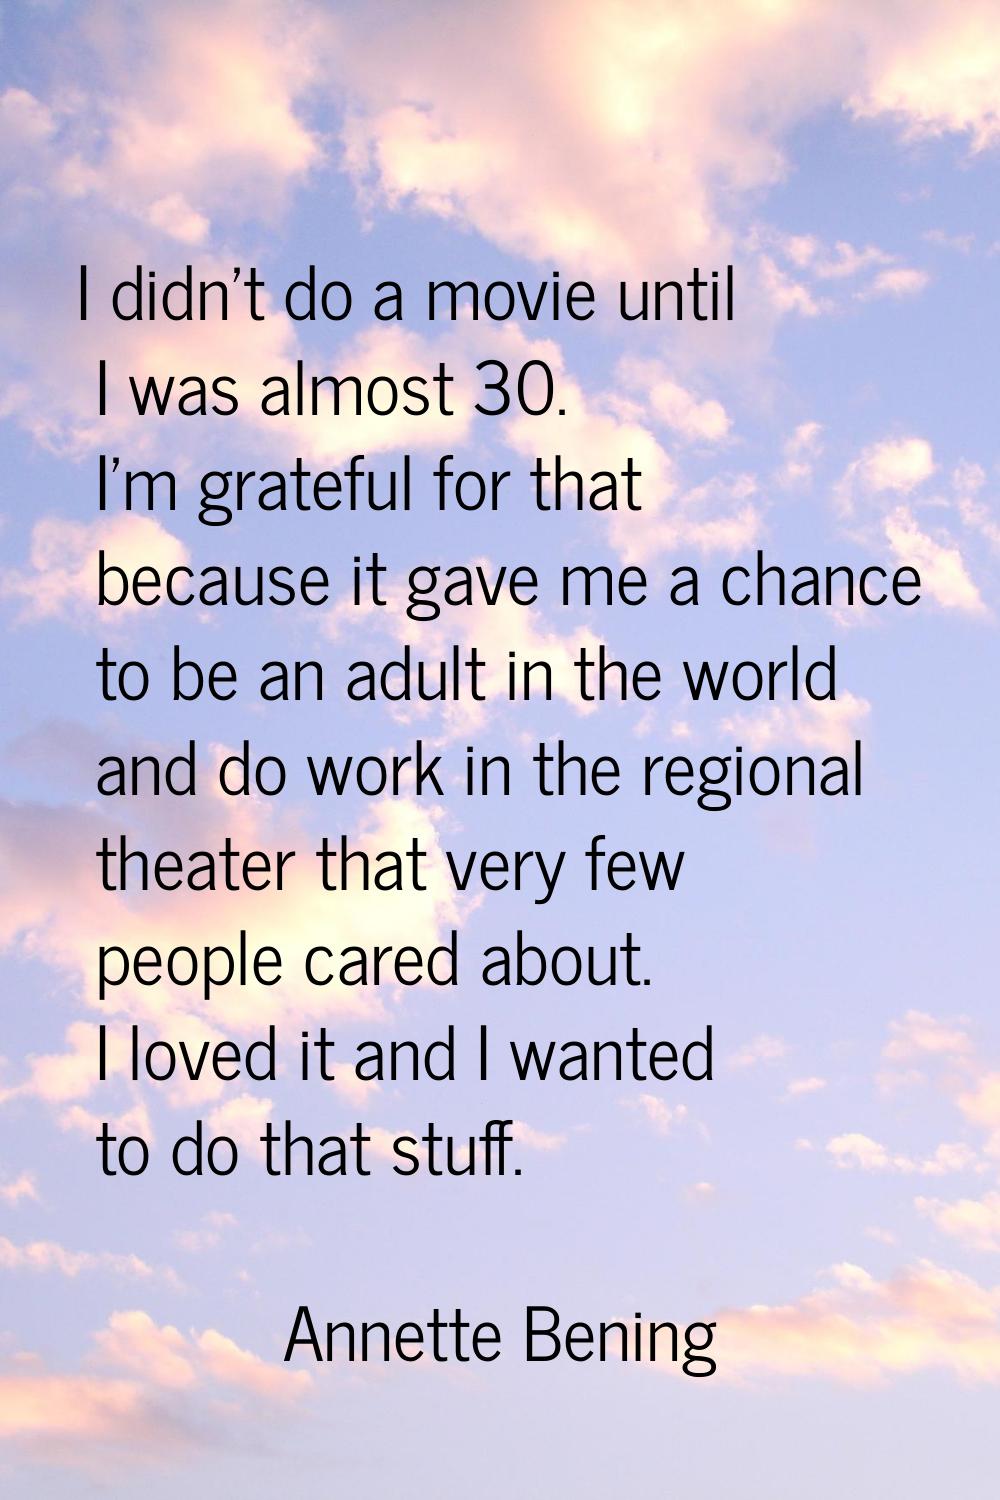 I didn't do a movie until I was almost 30. I'm grateful for that because it gave me a chance to be 